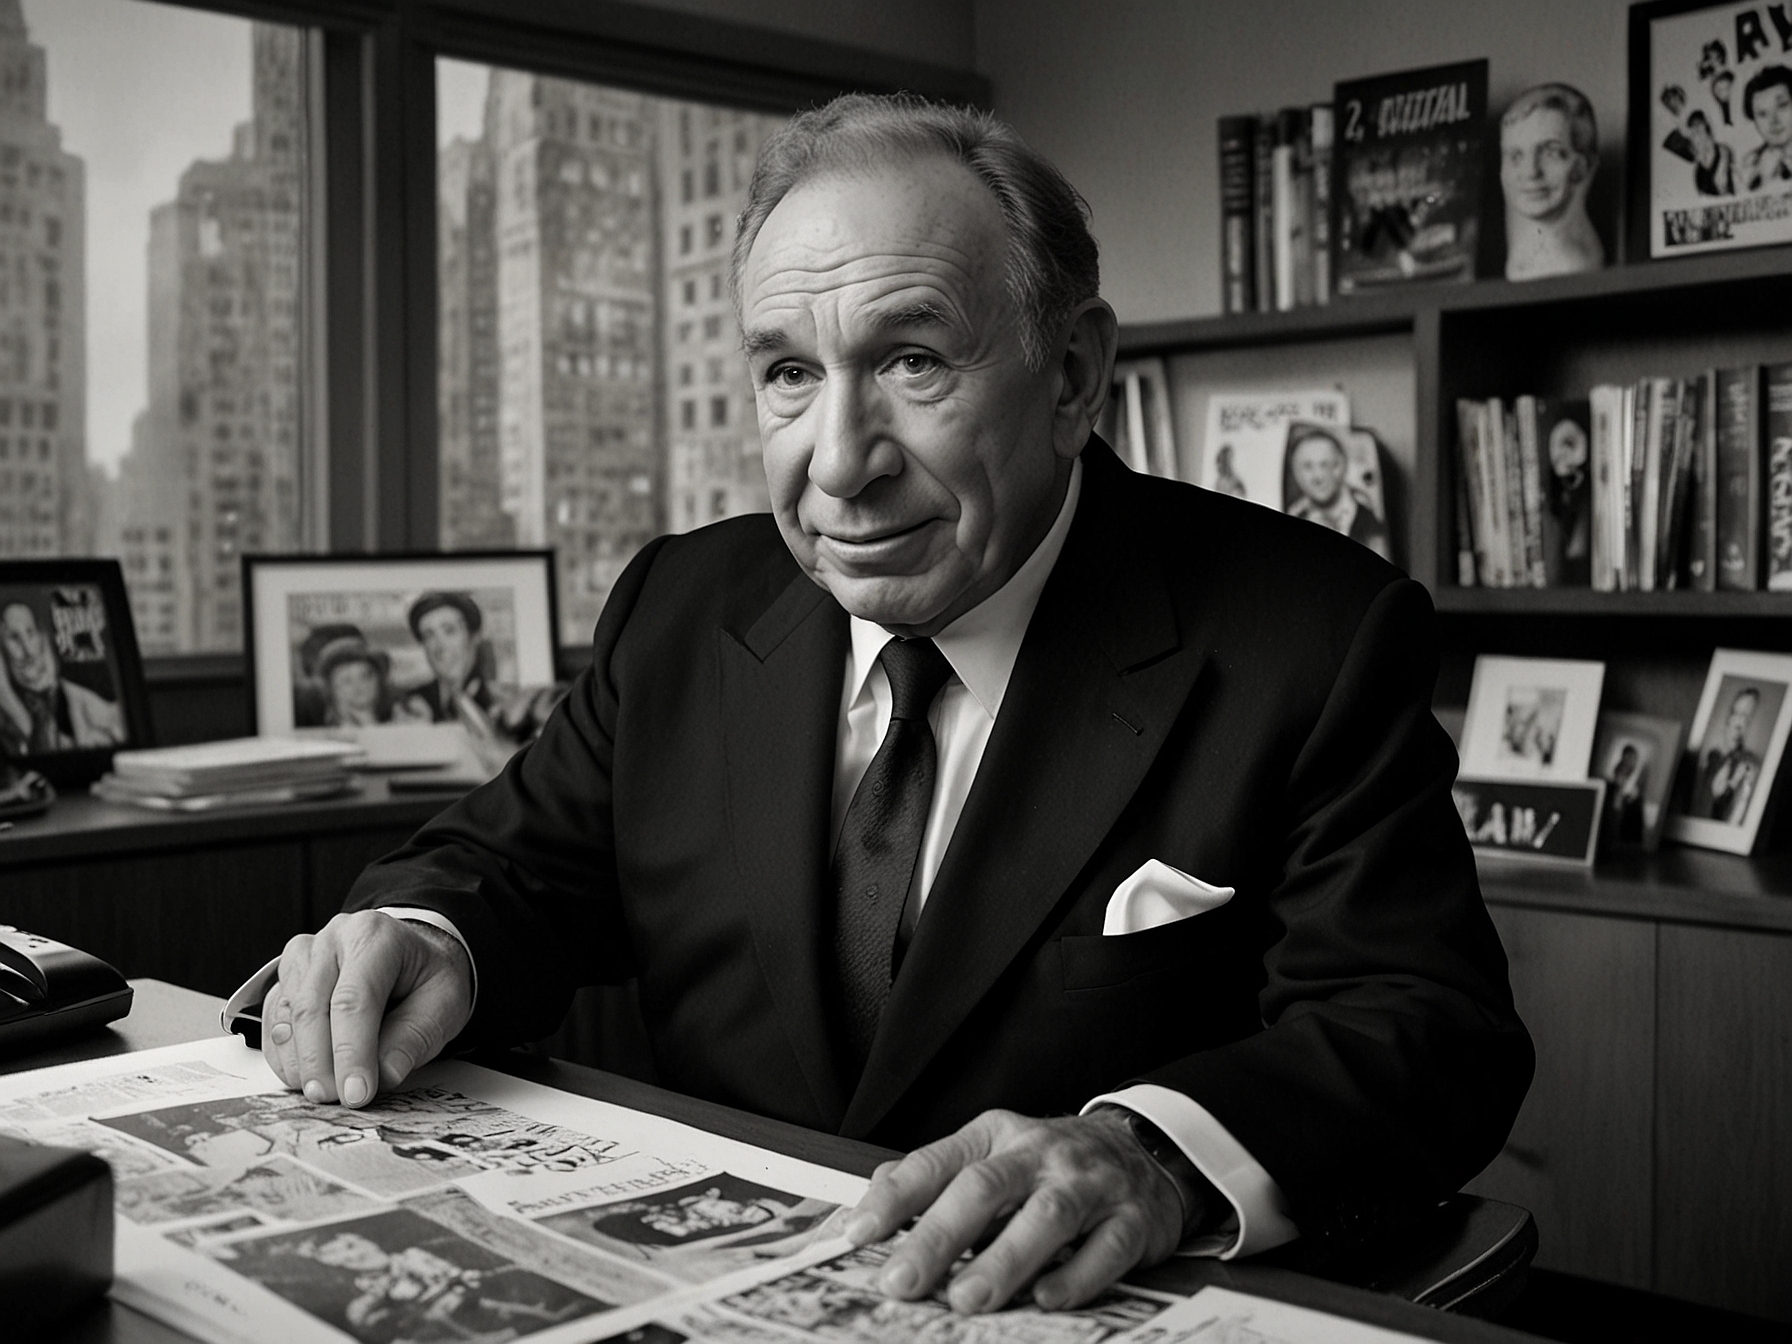 An image of Mel Brooks, the legendary director and producer, sitting in an office filled with 'Spaceballs' memorabilia, hinting at his involvement in the long-anticipated sequel.